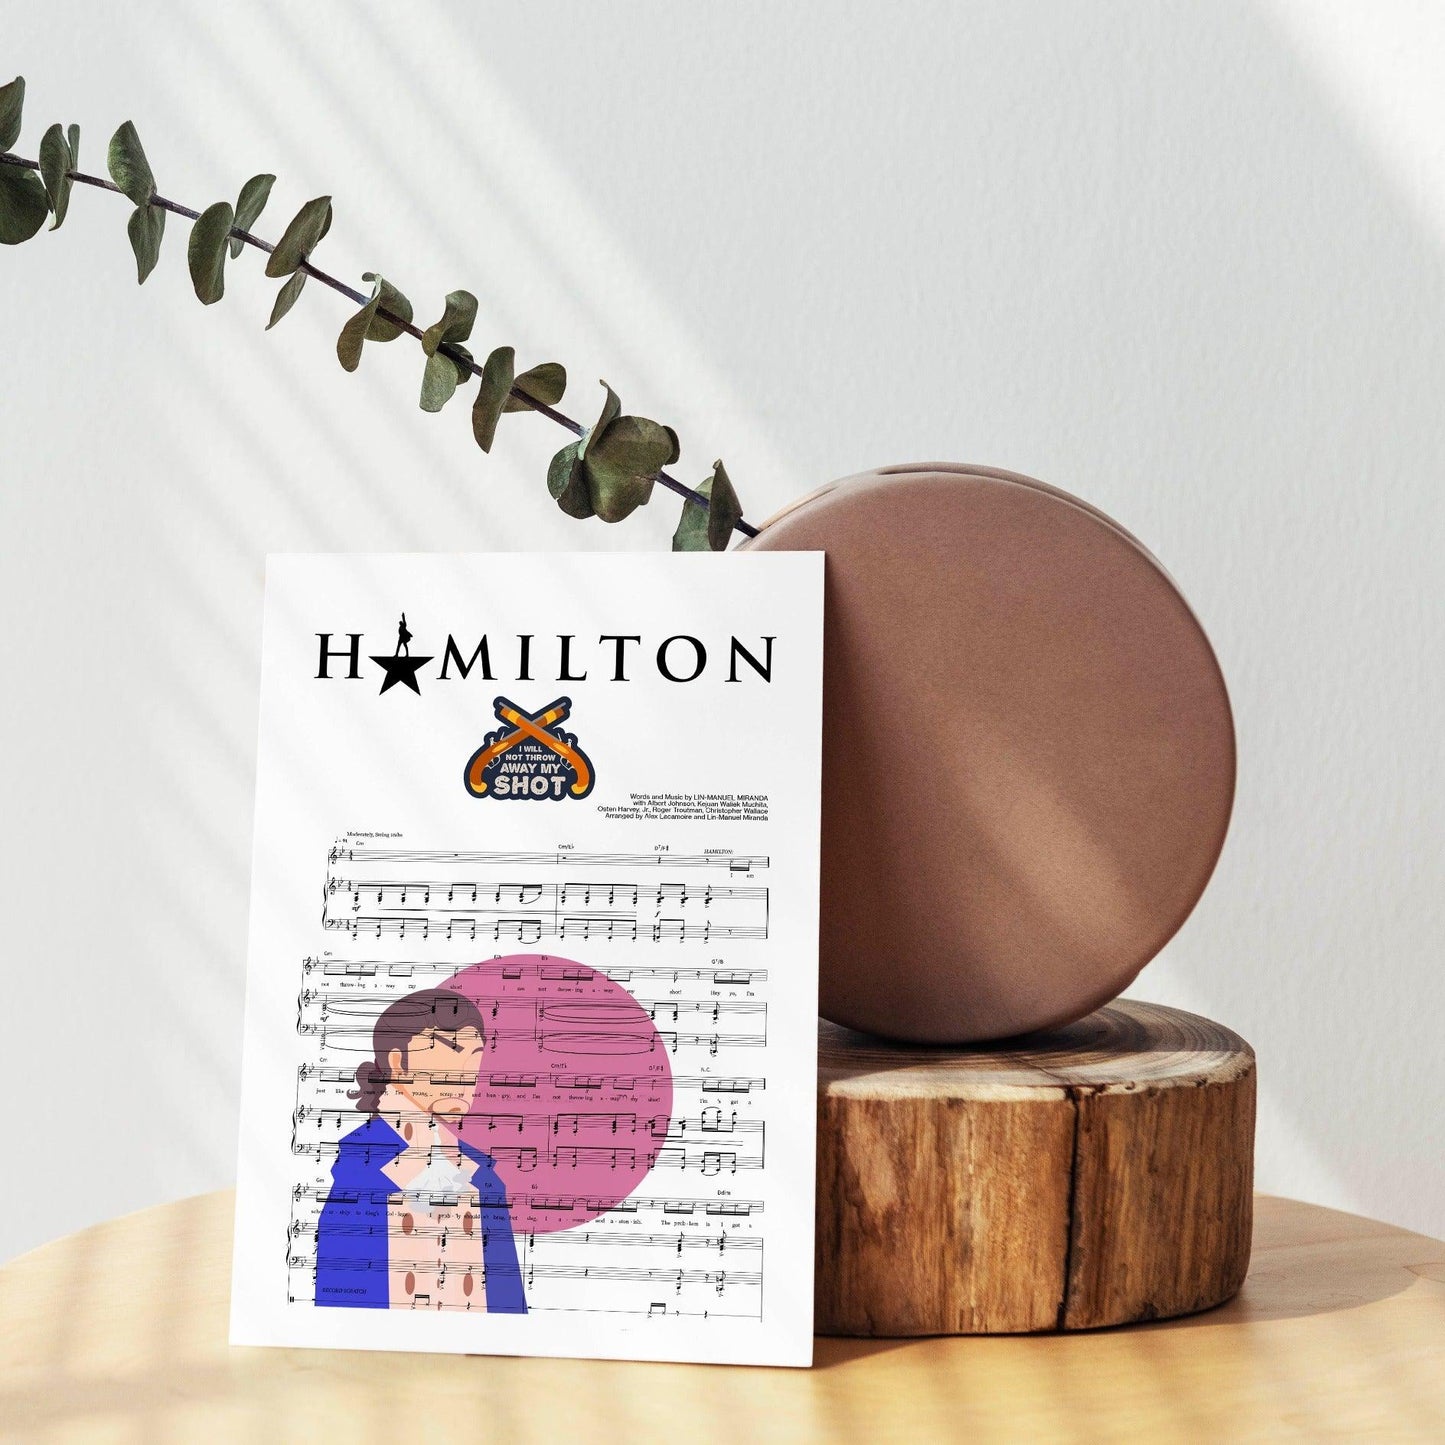 Hang your passion on the wall. Hamilton is a masterpiece and these posters capture the essence of the show. We're excited to offer officially licensed, Hamilton - MY SHOT posters that are easy to hang and affordable. Whether you're a fan of the show or the music, these posters are a must-have for any Hamilton lover.